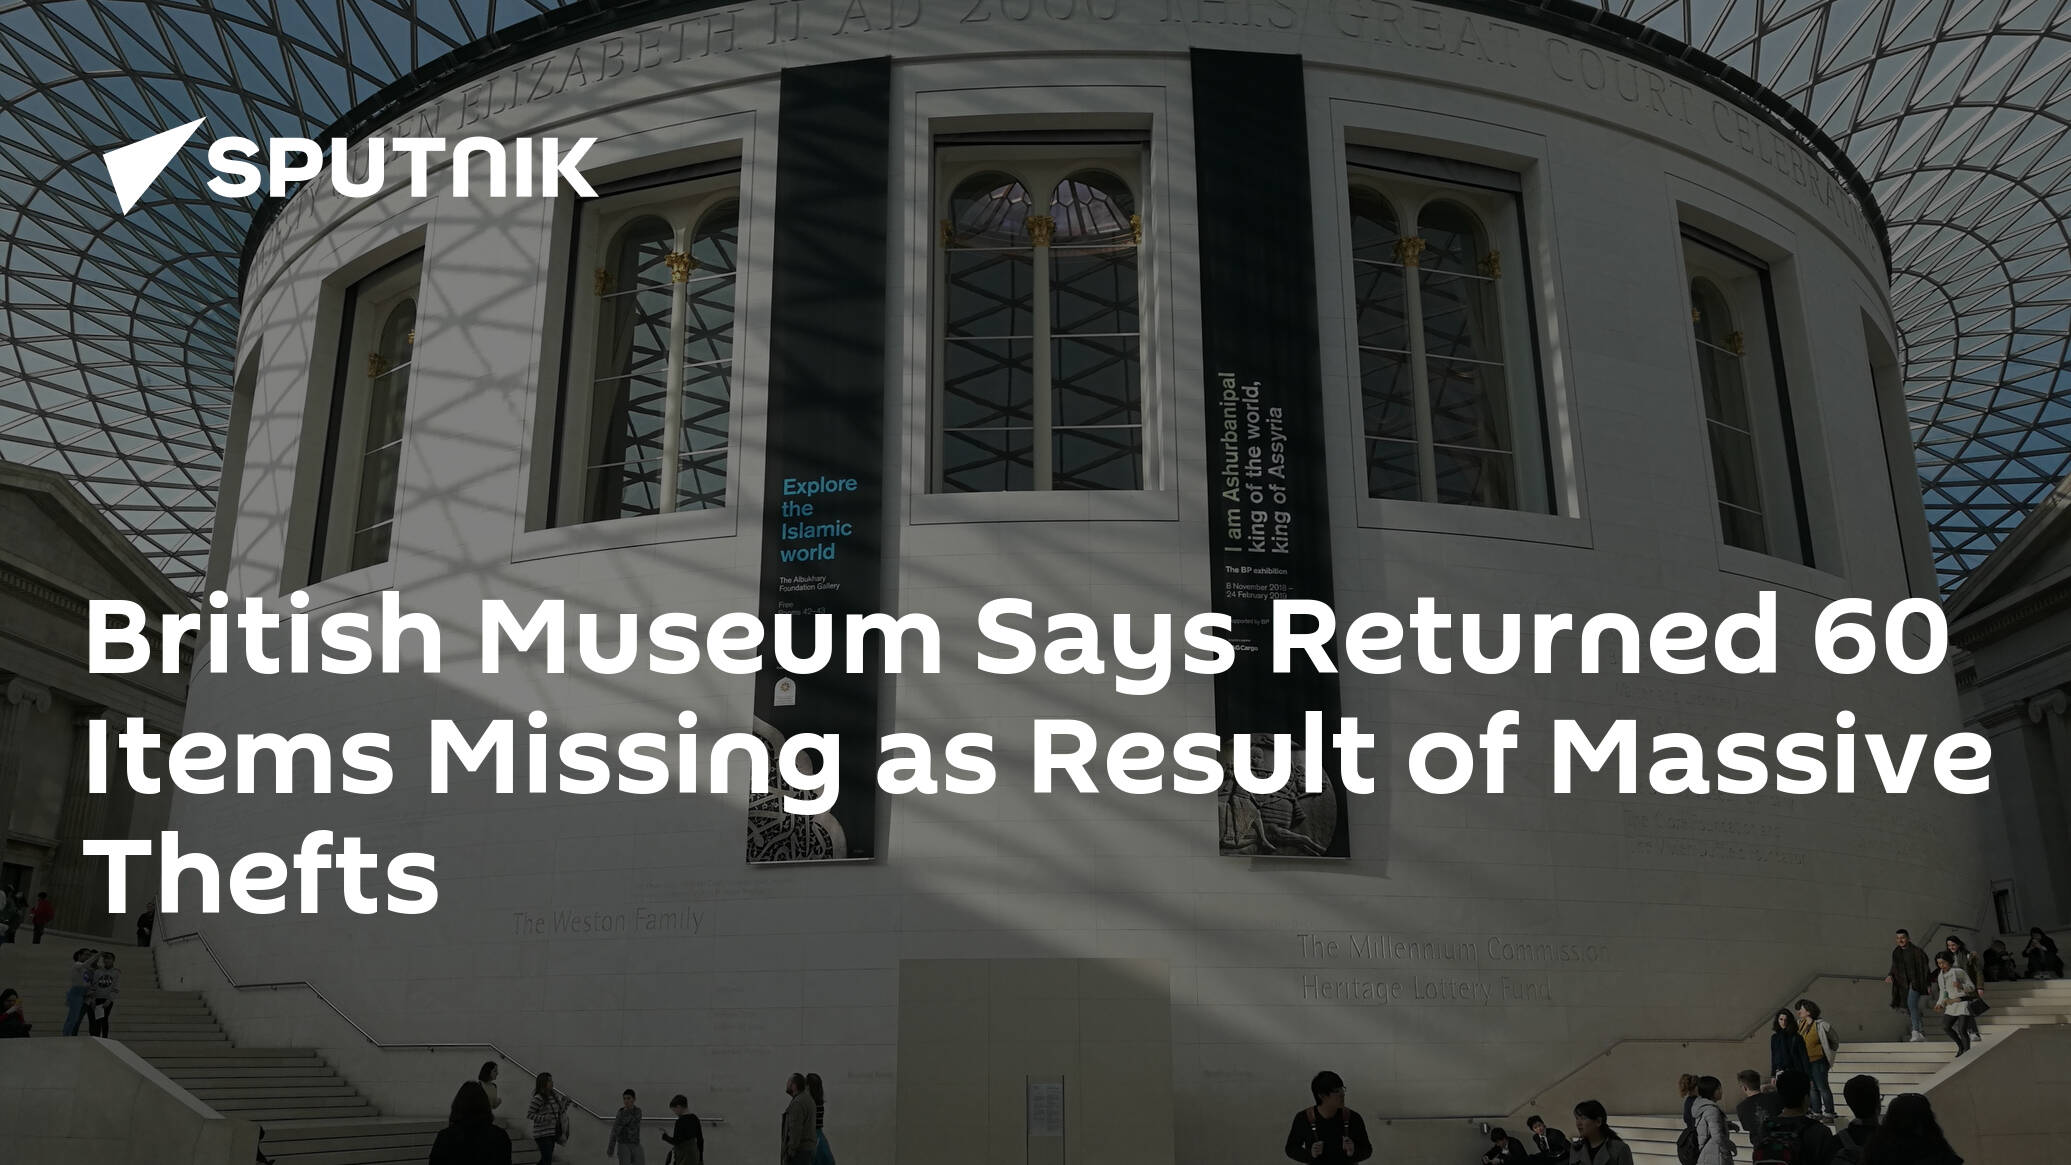 British Museum Says Returned 60 Items Missing as Result of Massive Thefts